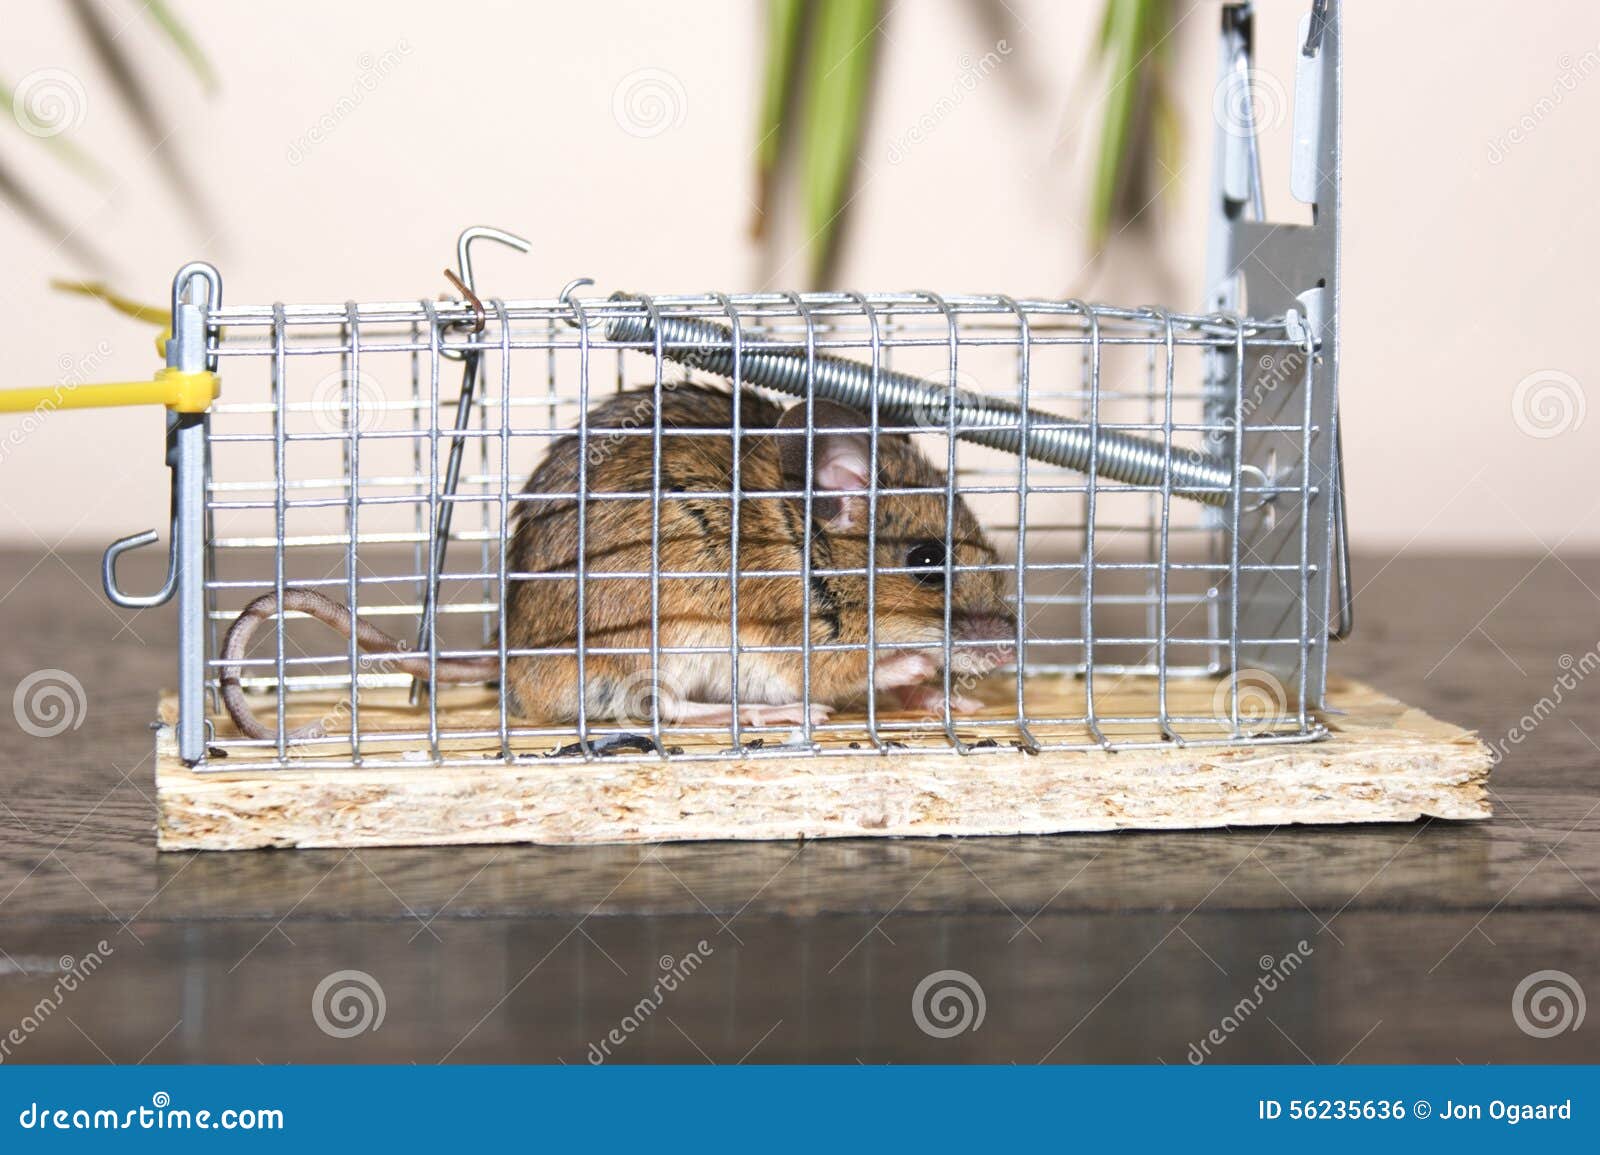 https://thumbs.dreamstime.com/z/waldmaus-wood-mouse-apodemus-sylvaticus-was-caught-live-trap-my-attic-bavaria-germany-was-released-unharmed-56235636.jpg